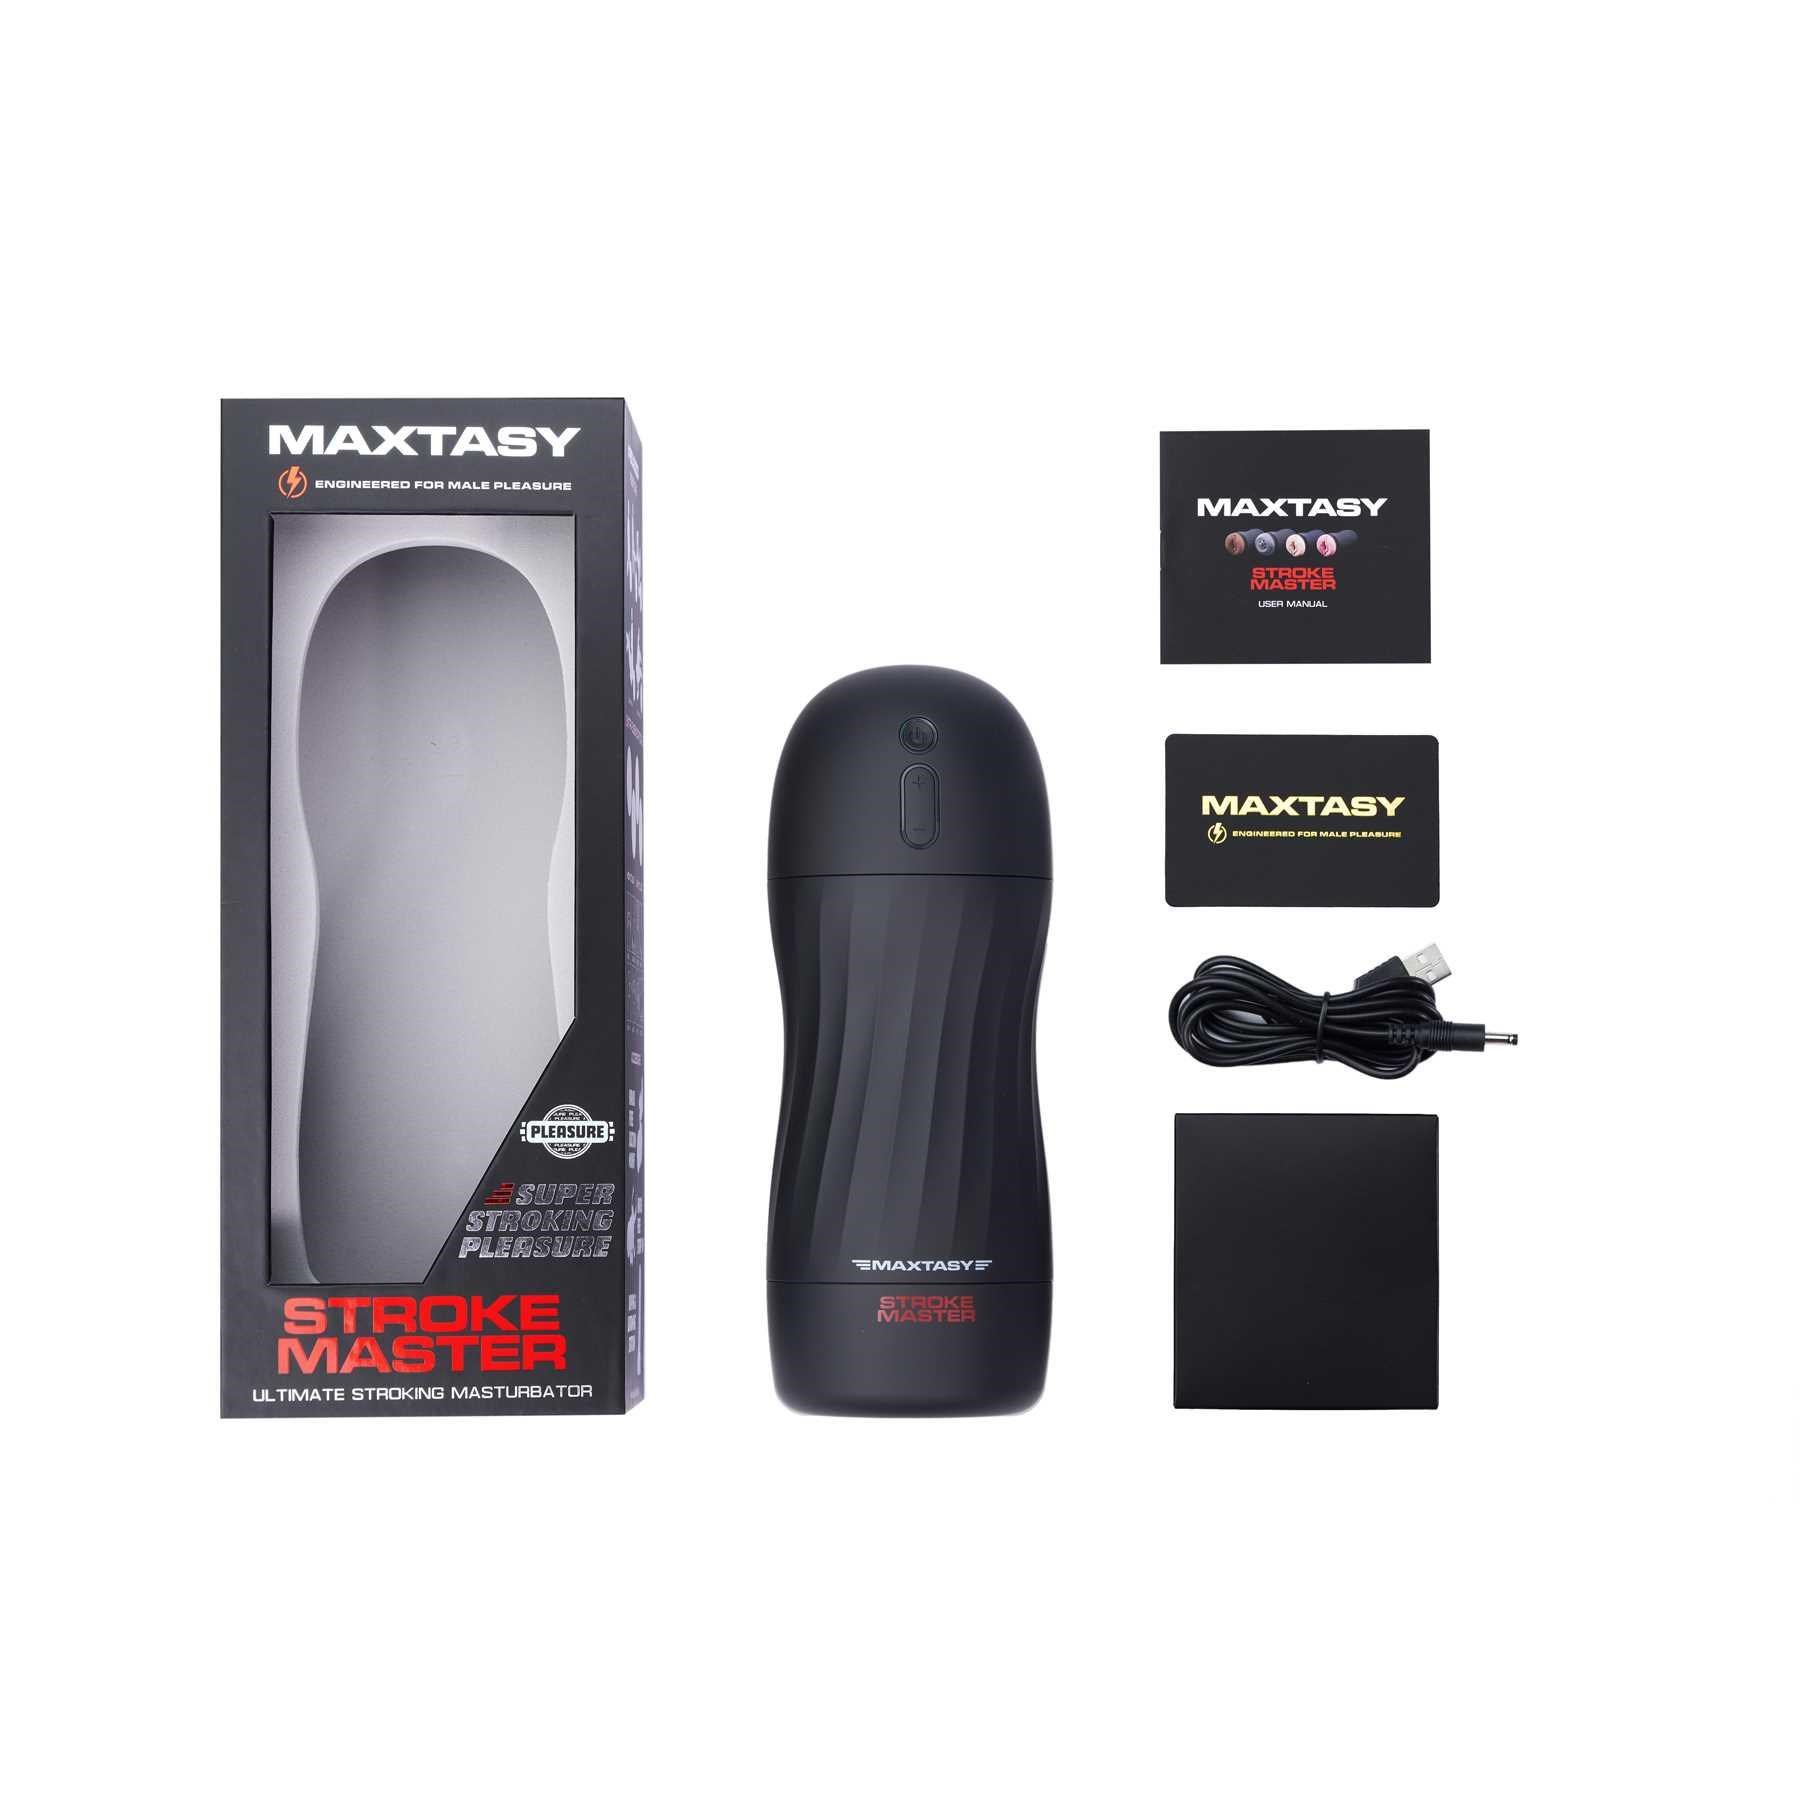 Maxtasy Stroke Master Stroker - Realistic Pink Vagina with accessories and box